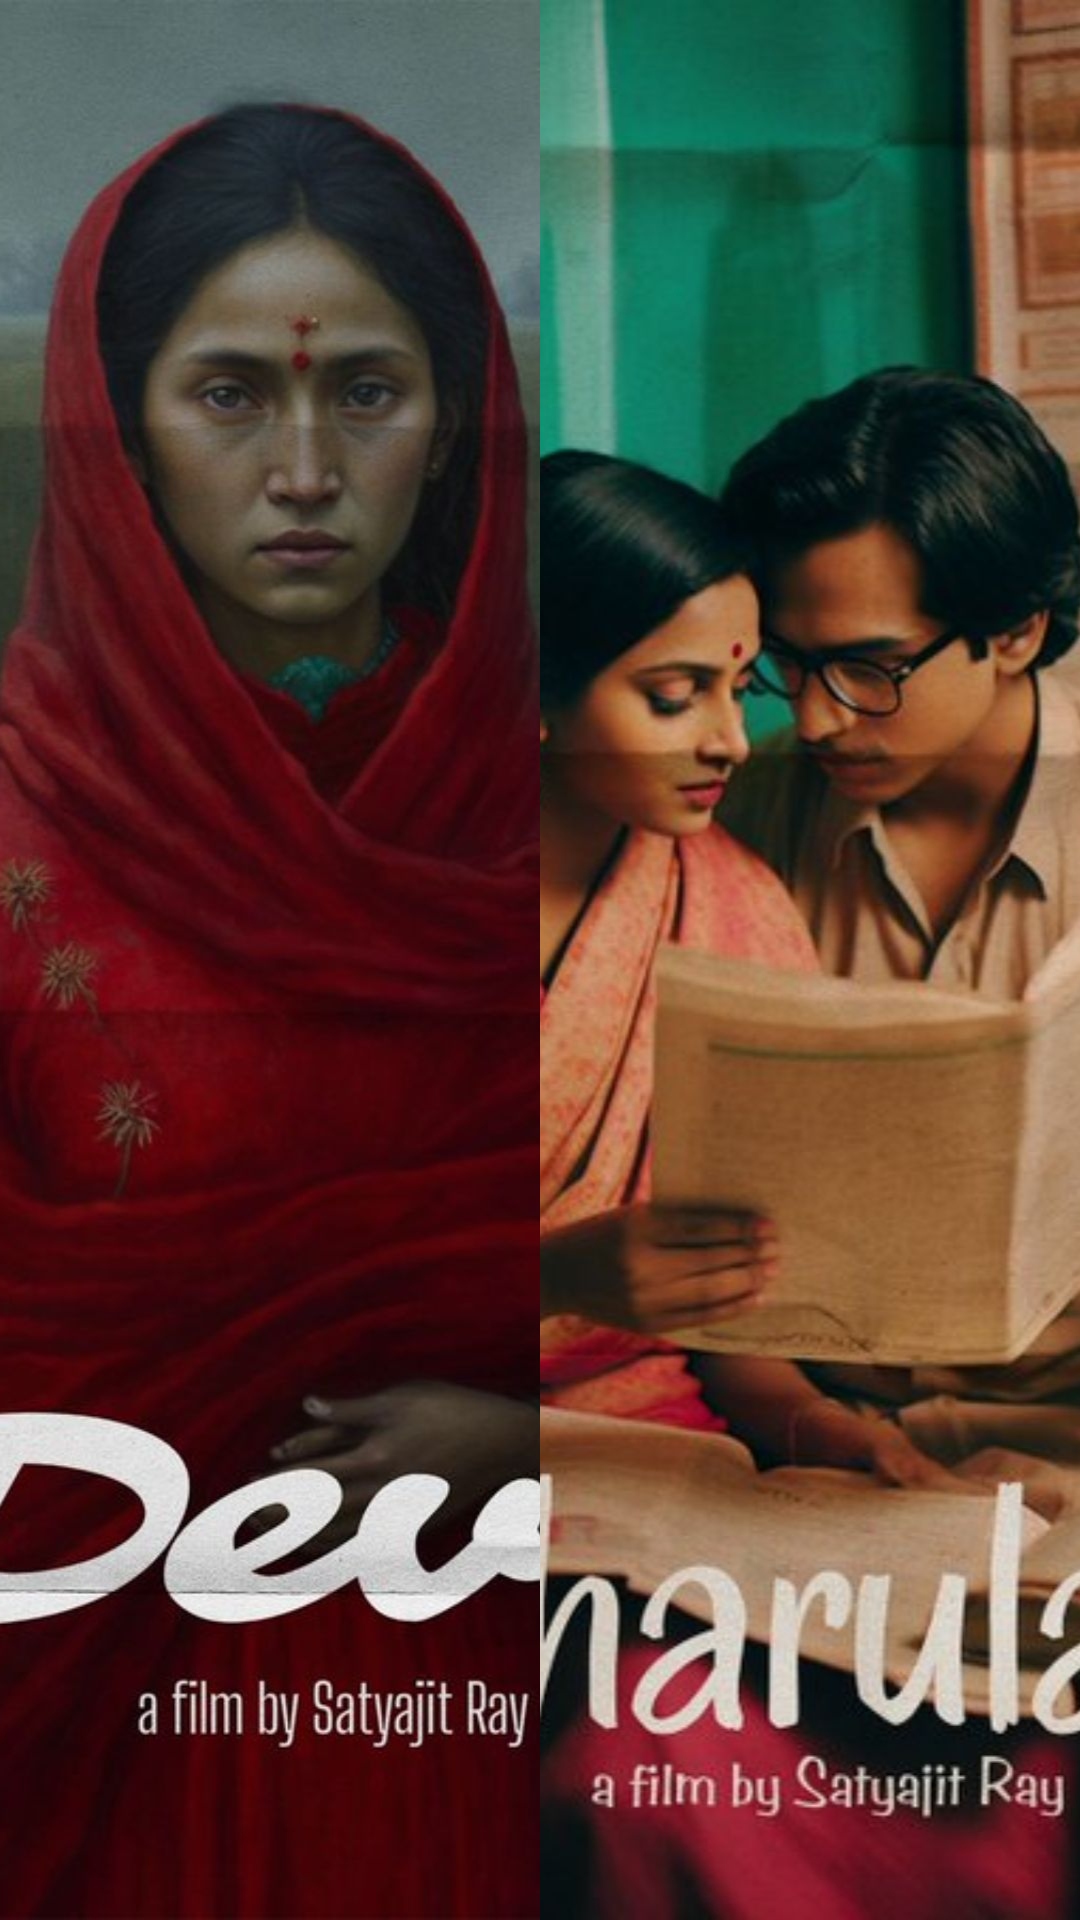 Satyajit Ray's movie posters get a modern makeover with AI